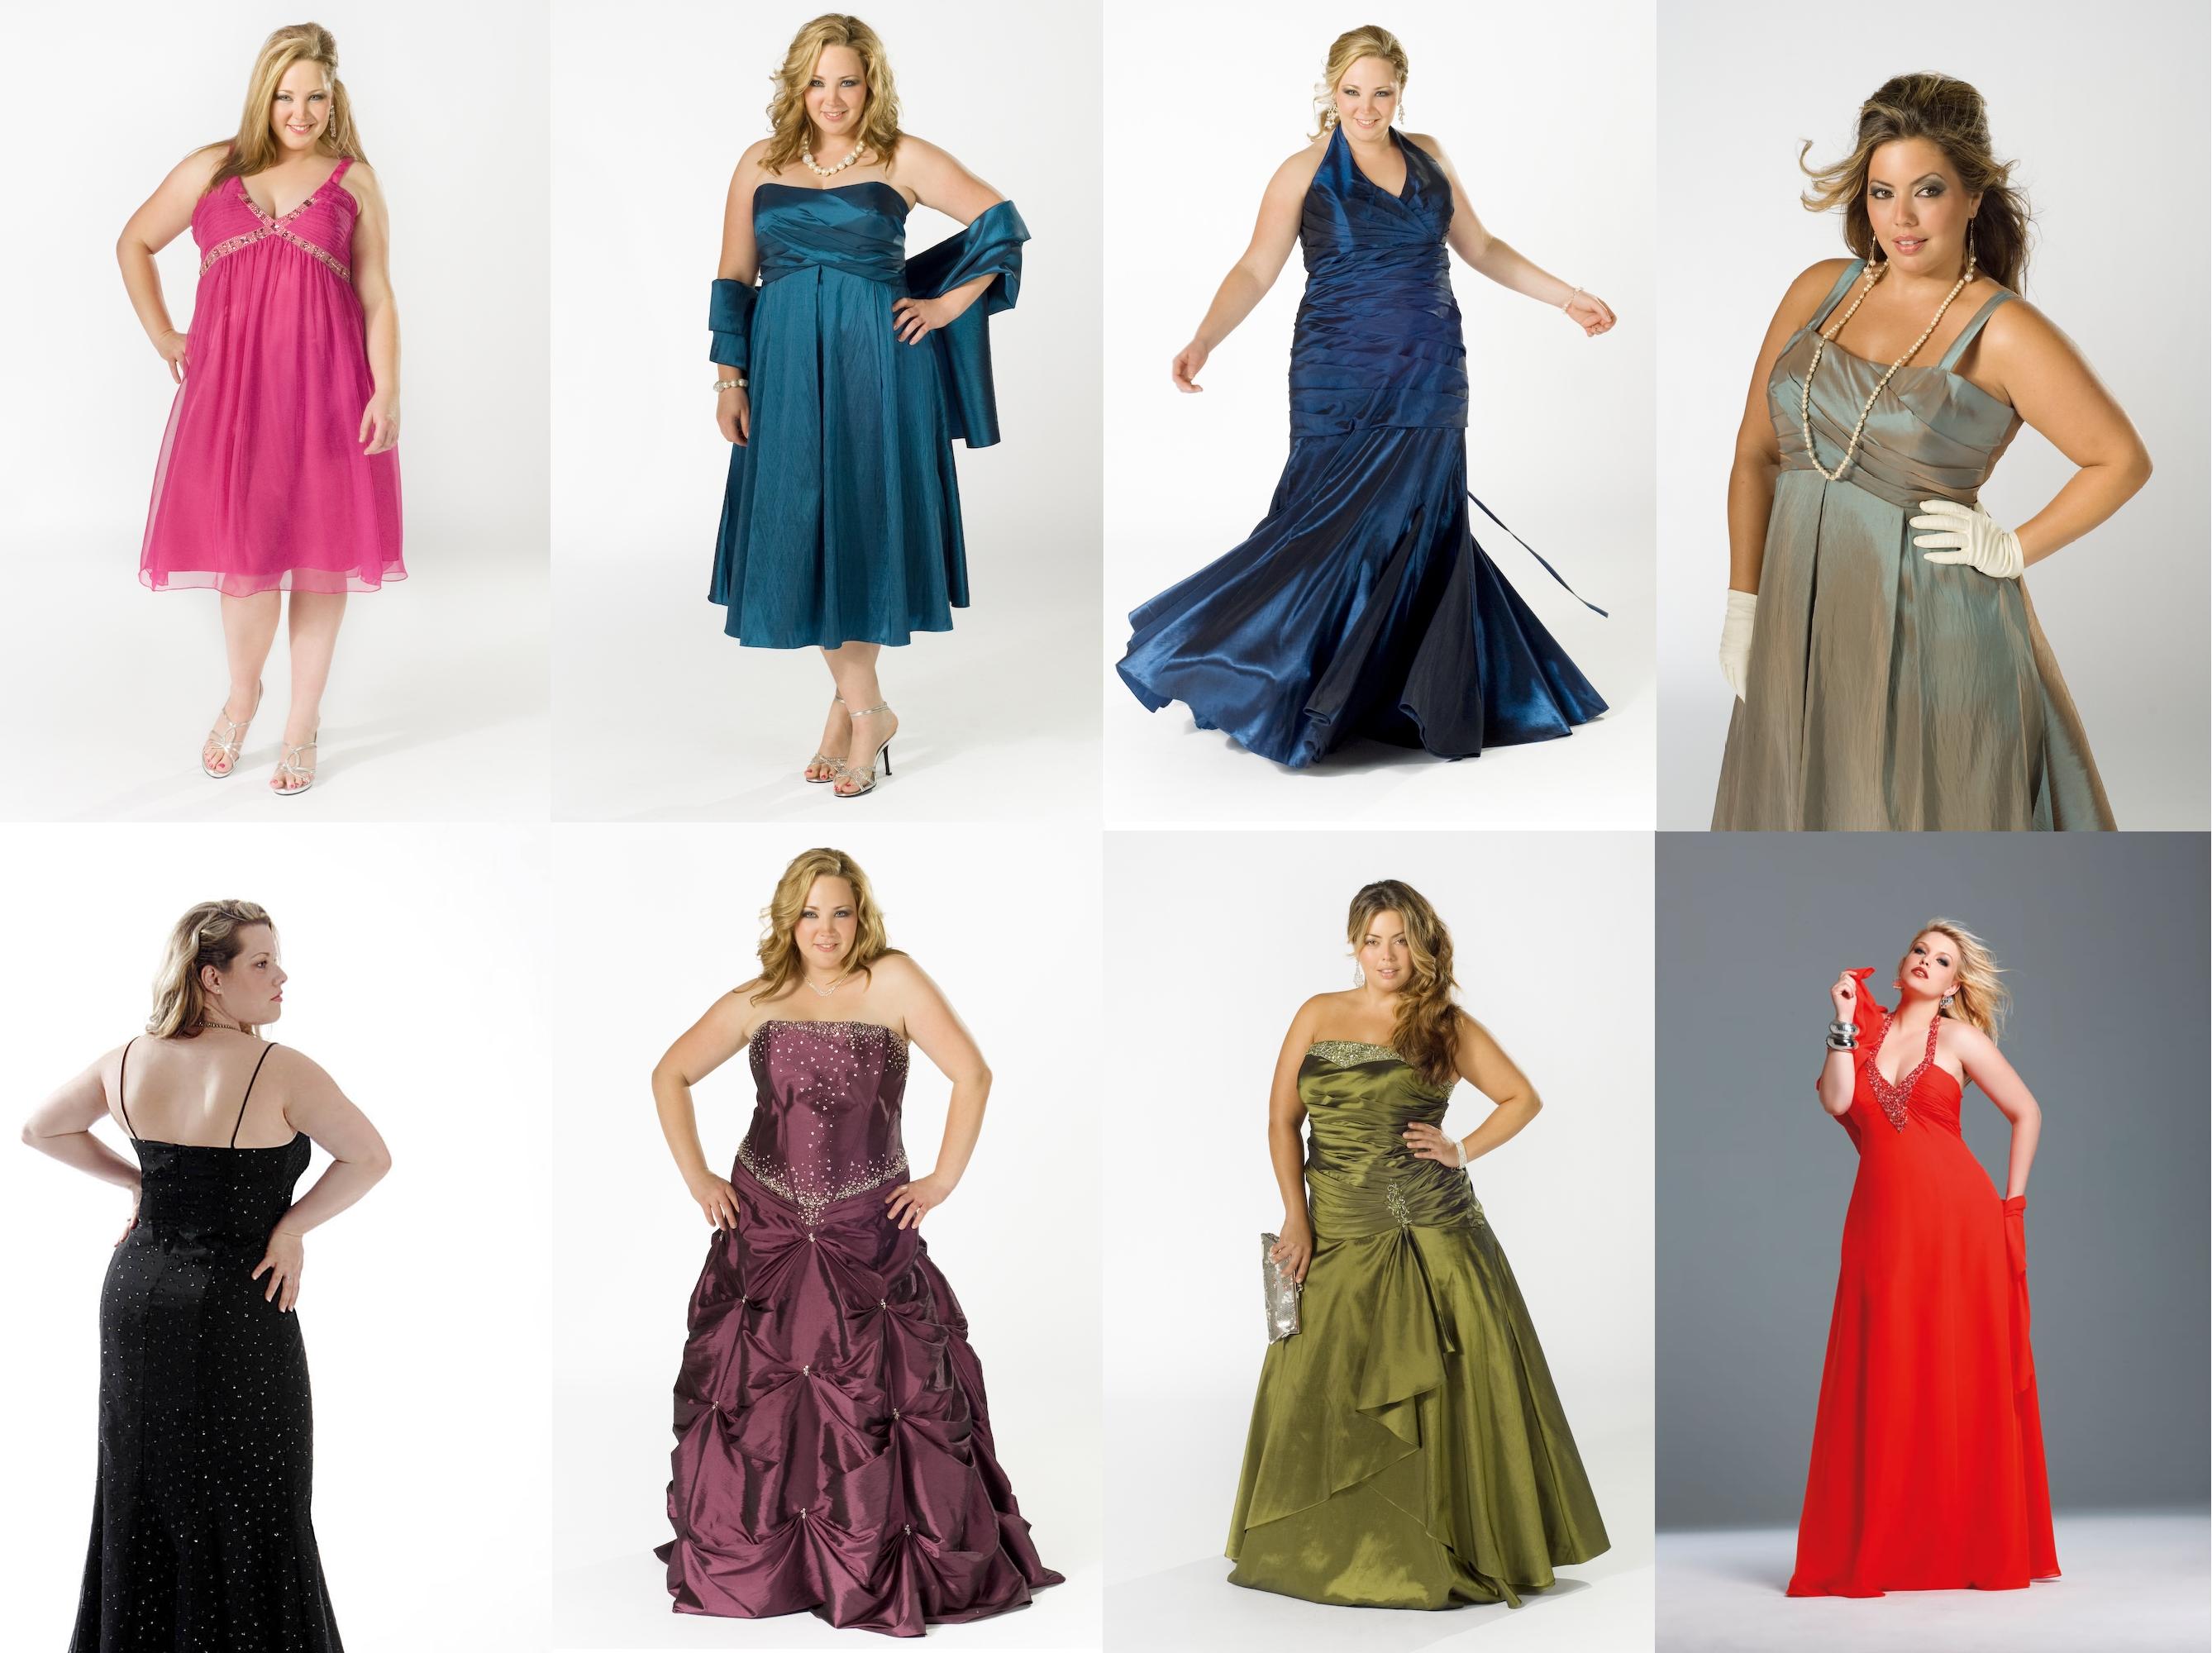 Party Dresses For Larger Sizes - Make You Look Like A Princess